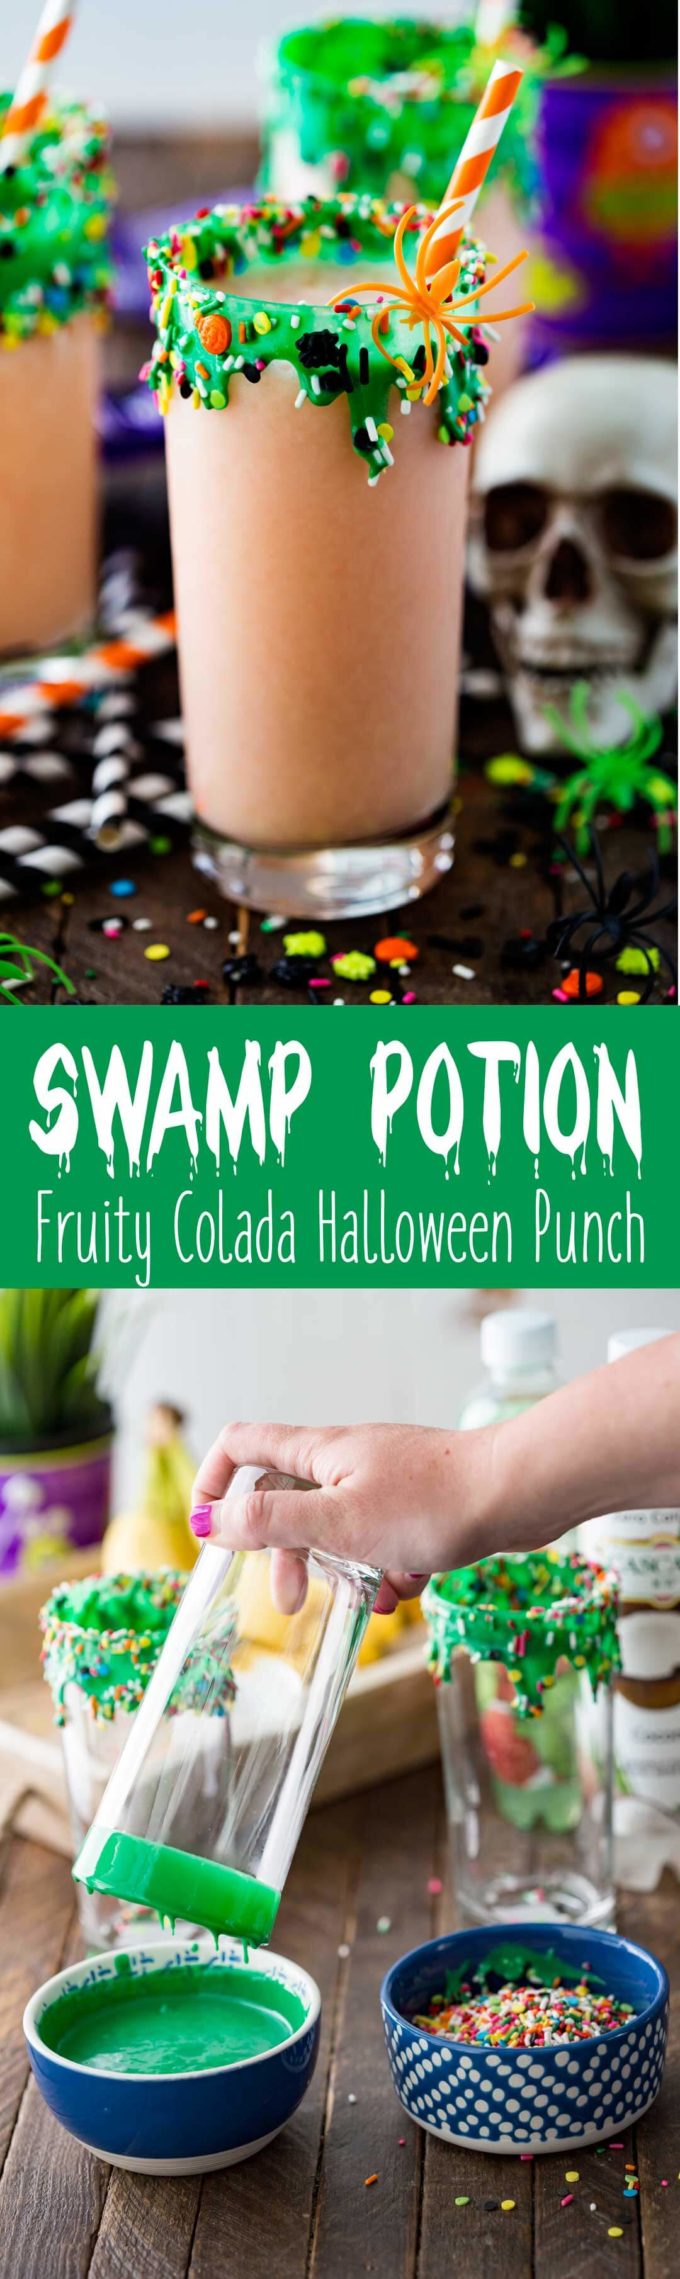 Swamp potion is a halloween punch you will love! 